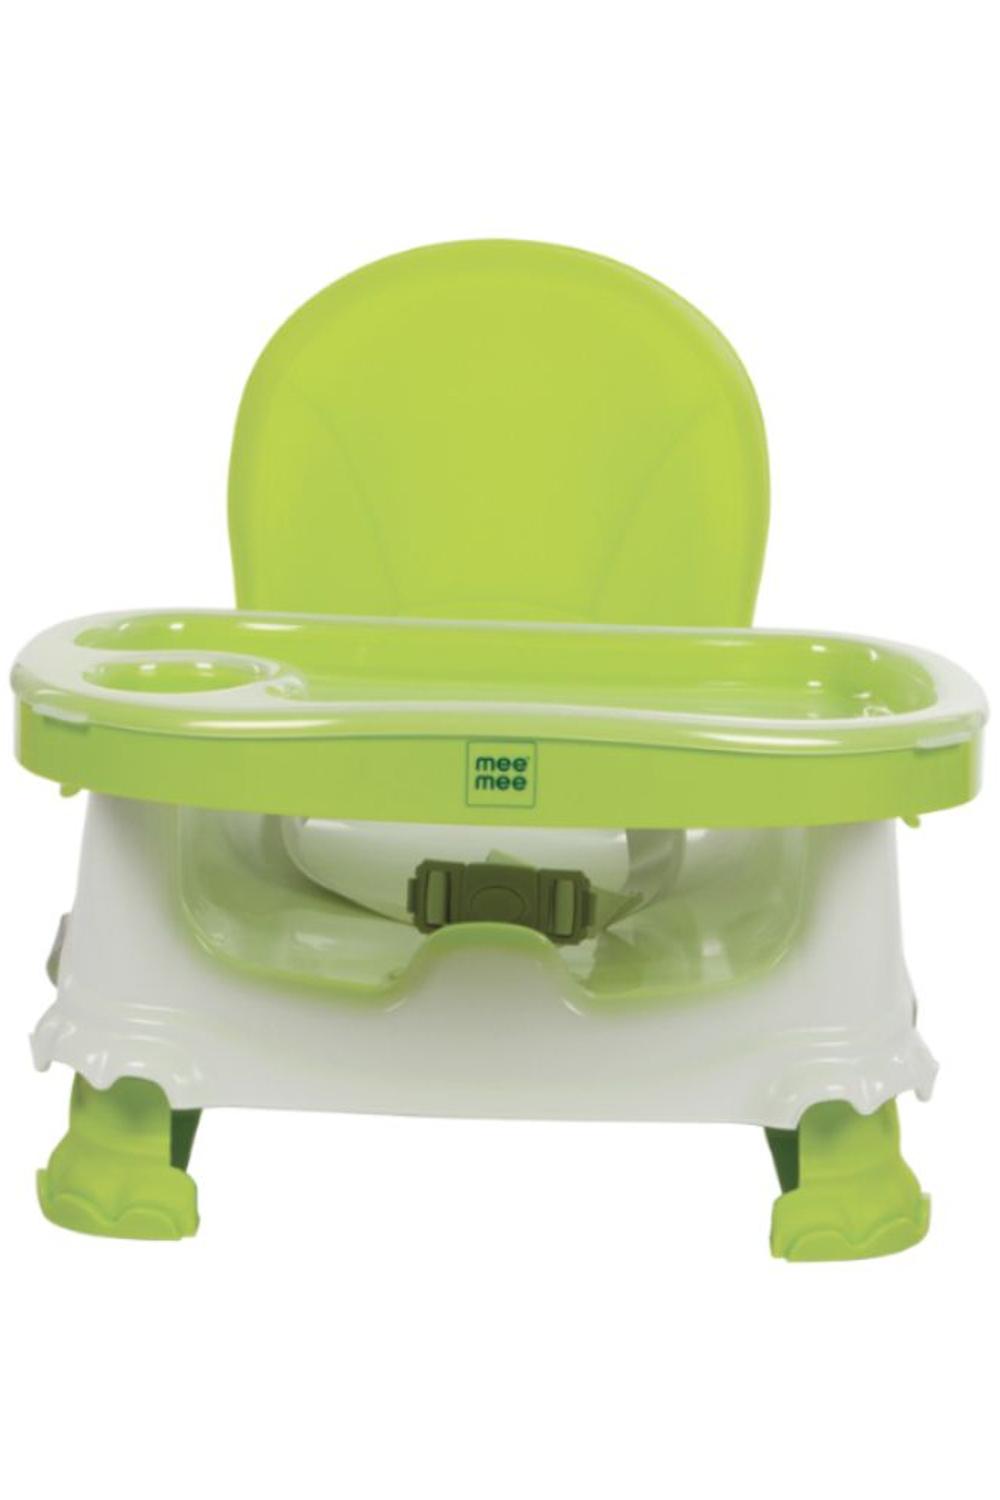 Green 2 in 1 Infant and Toddler Booster Seat